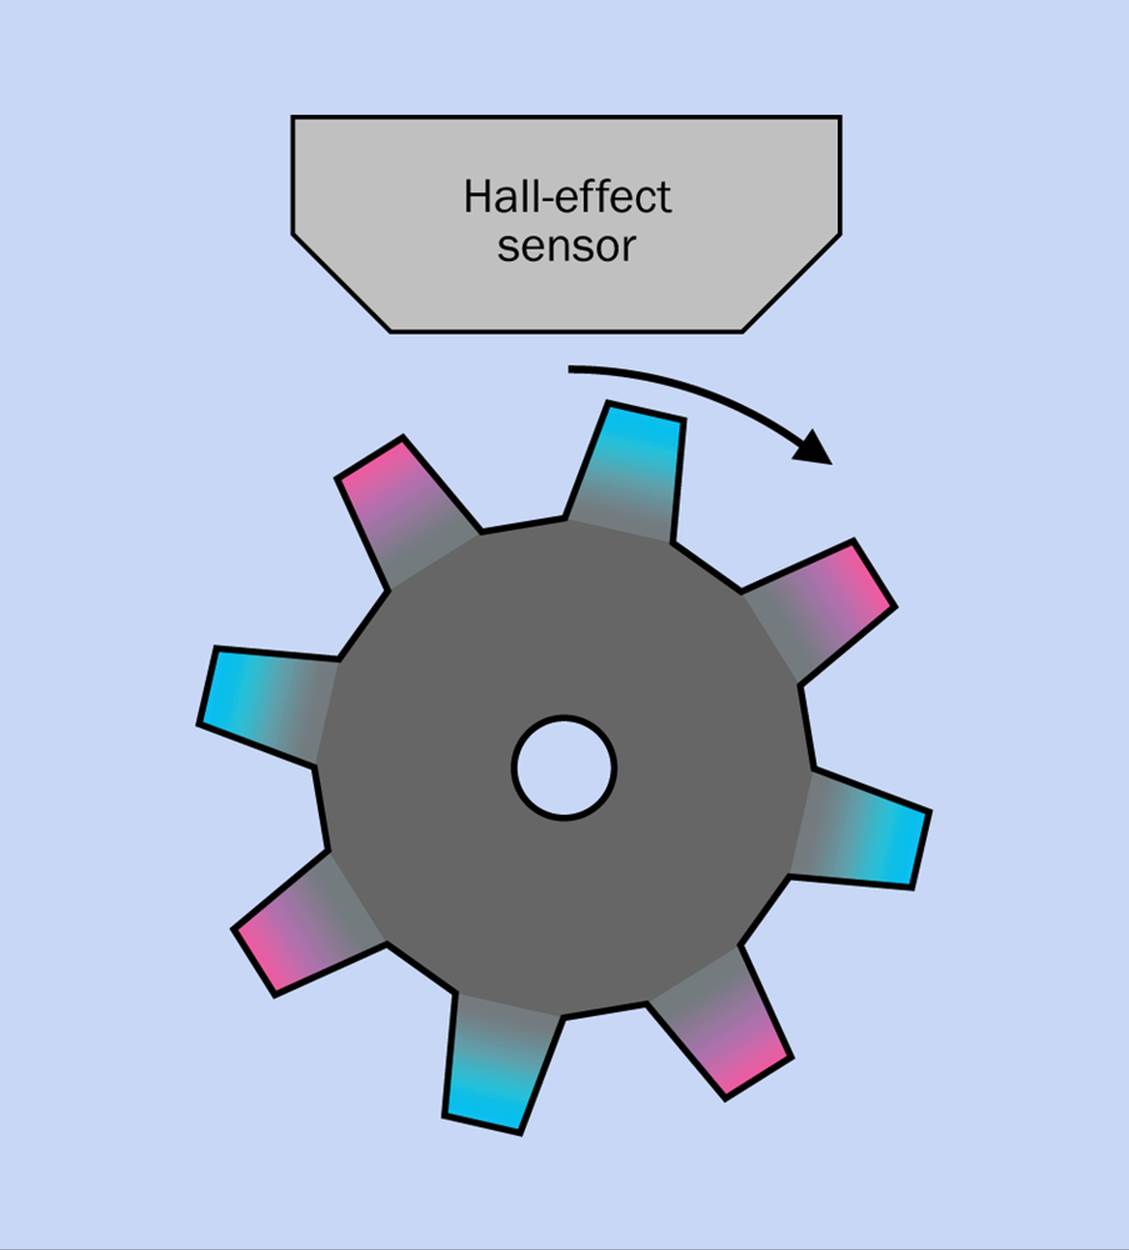 A Hall sensor can measure the speed of rotation of wheel with teeth of alternating magnetic polarity.